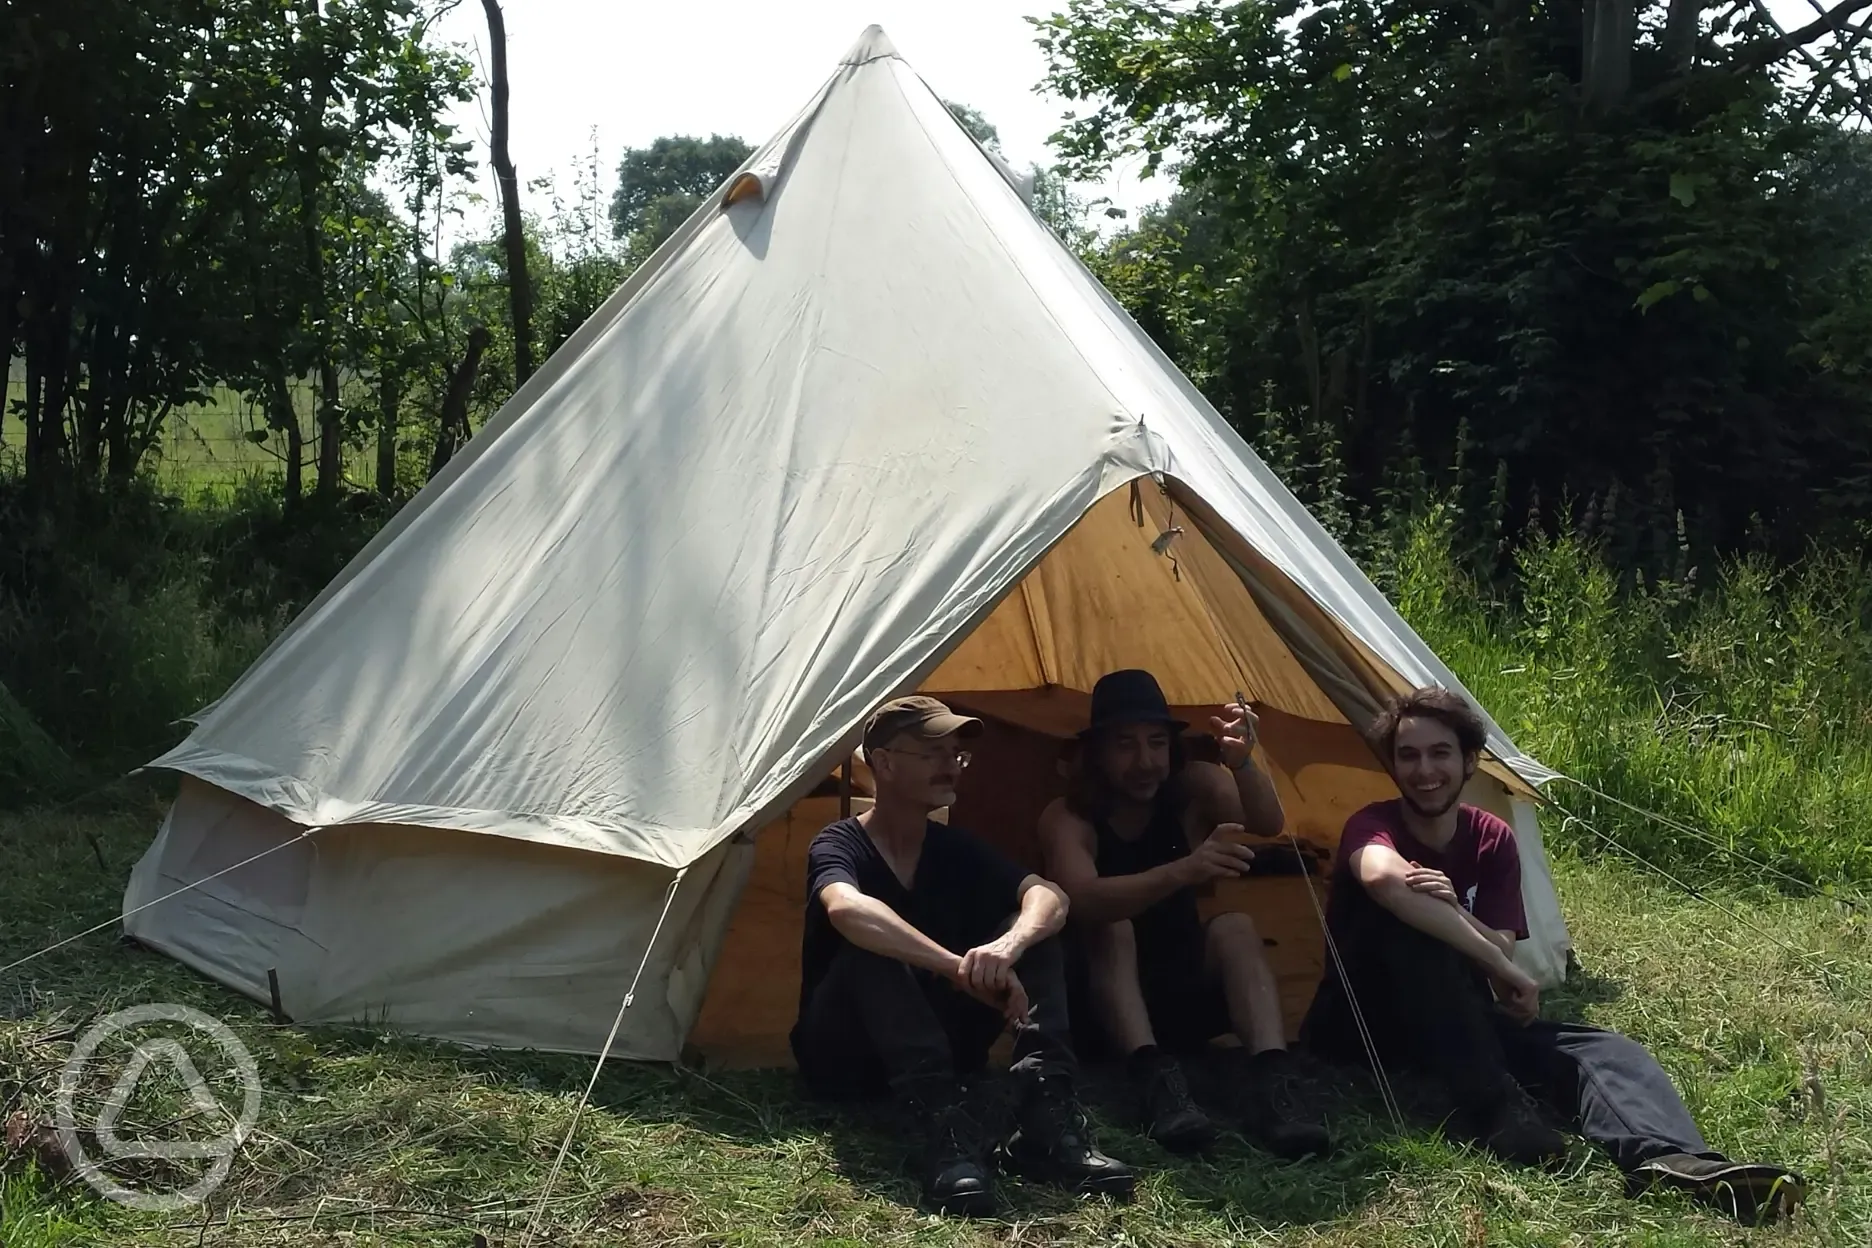 Boys and the bell tent